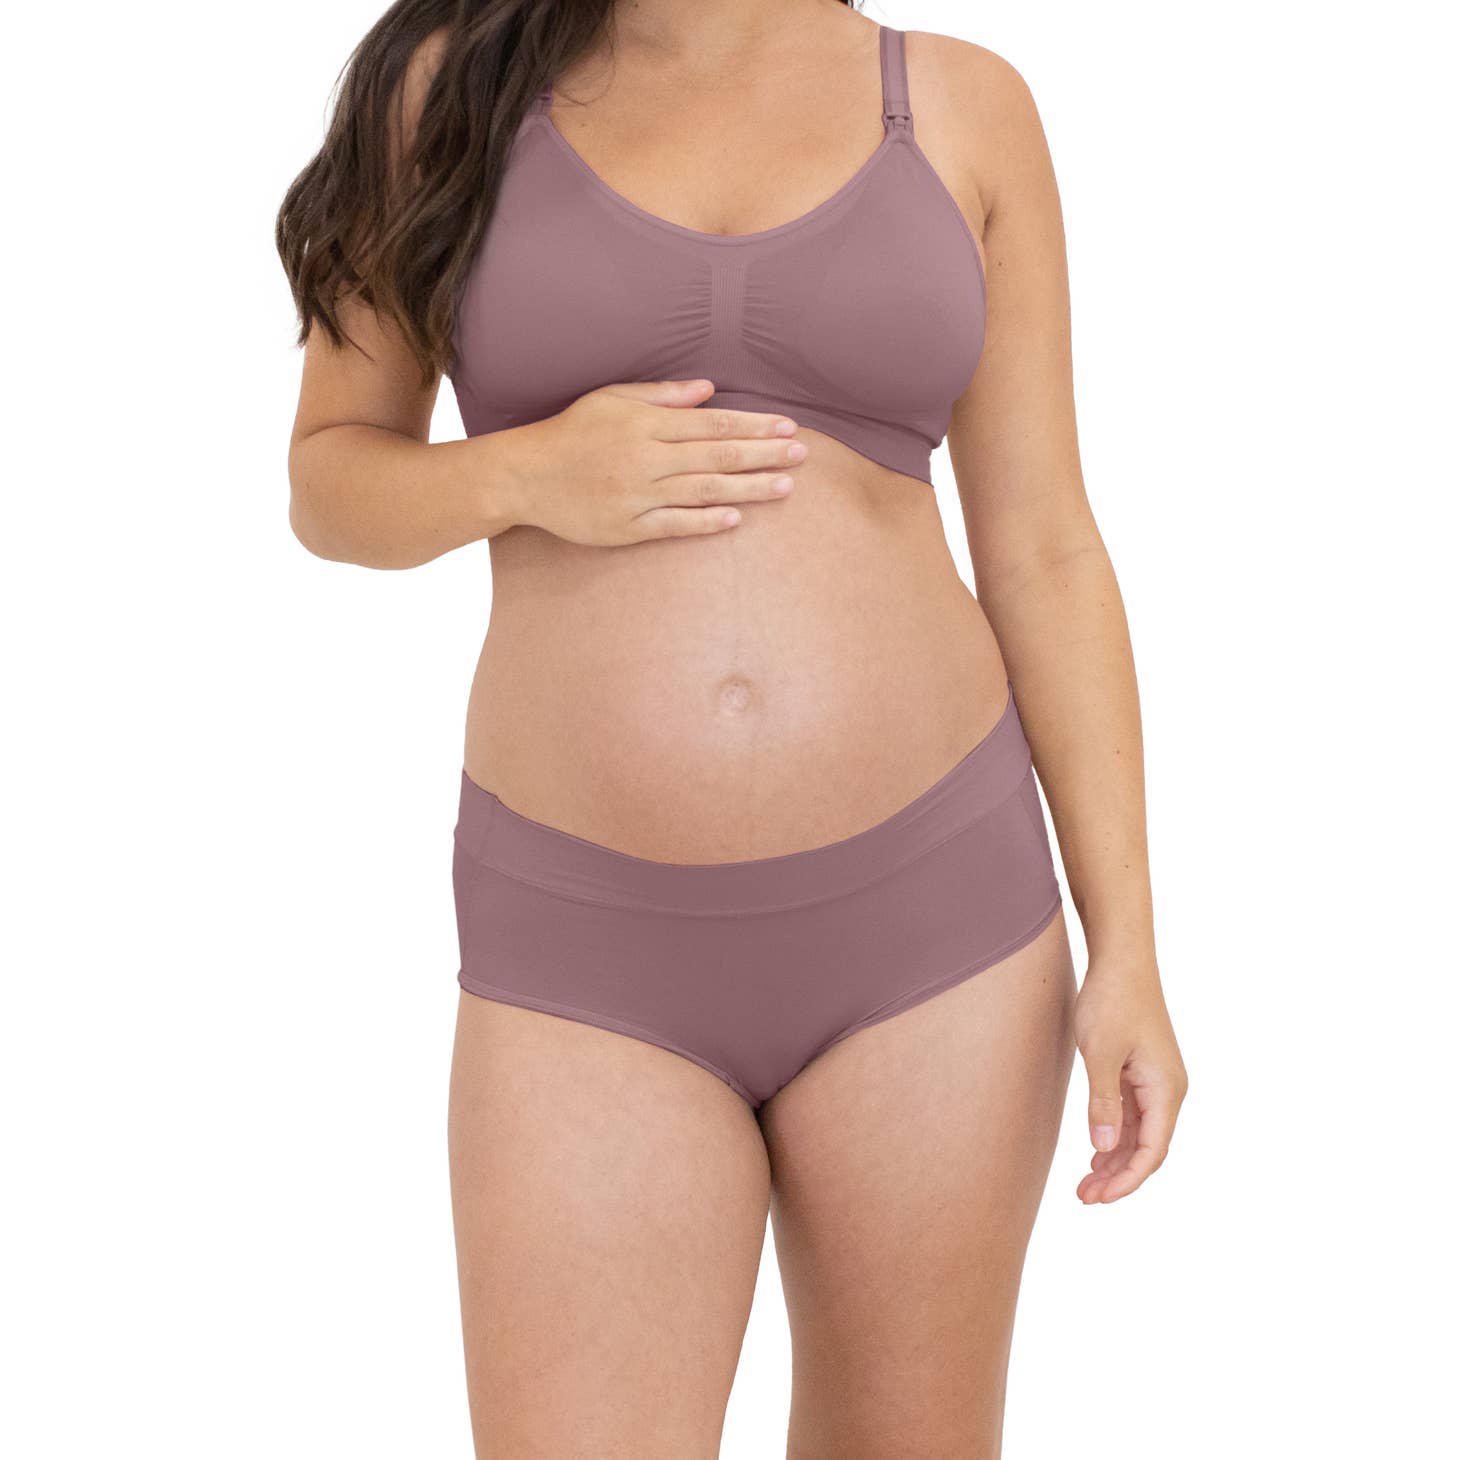 High-Waisted Postpartum Underwear in Dusty Hues (5-Pack) – Hello